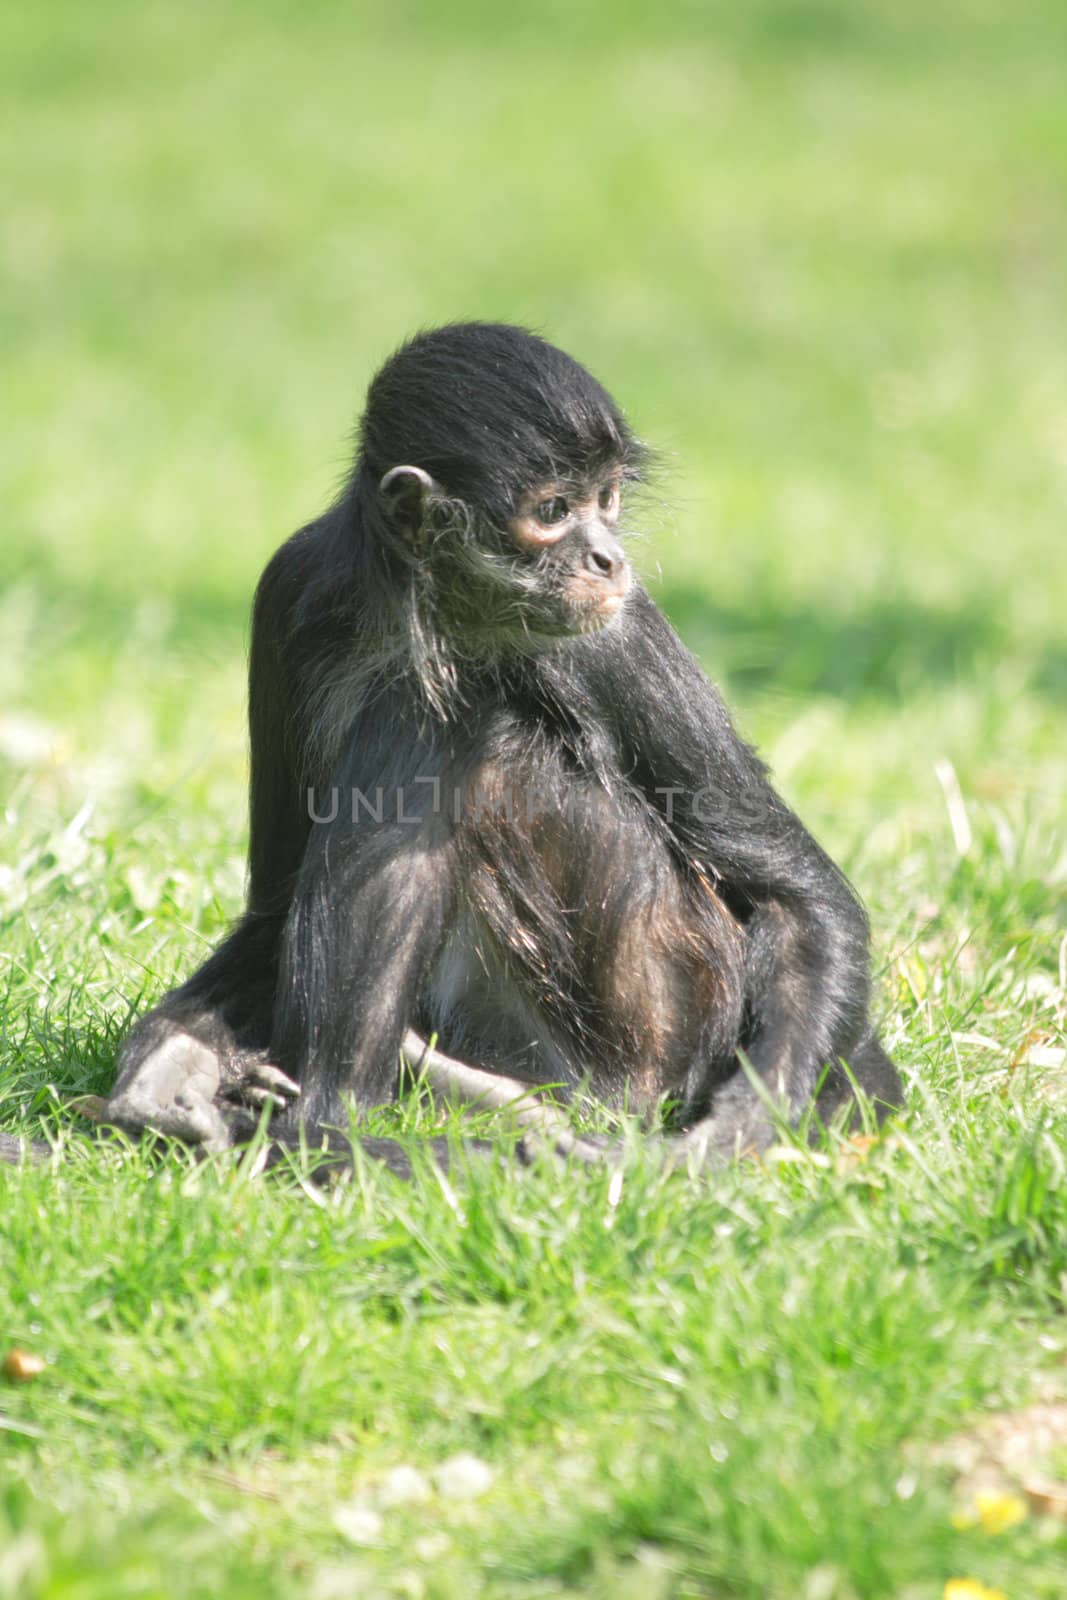 small black monkey on the green grass